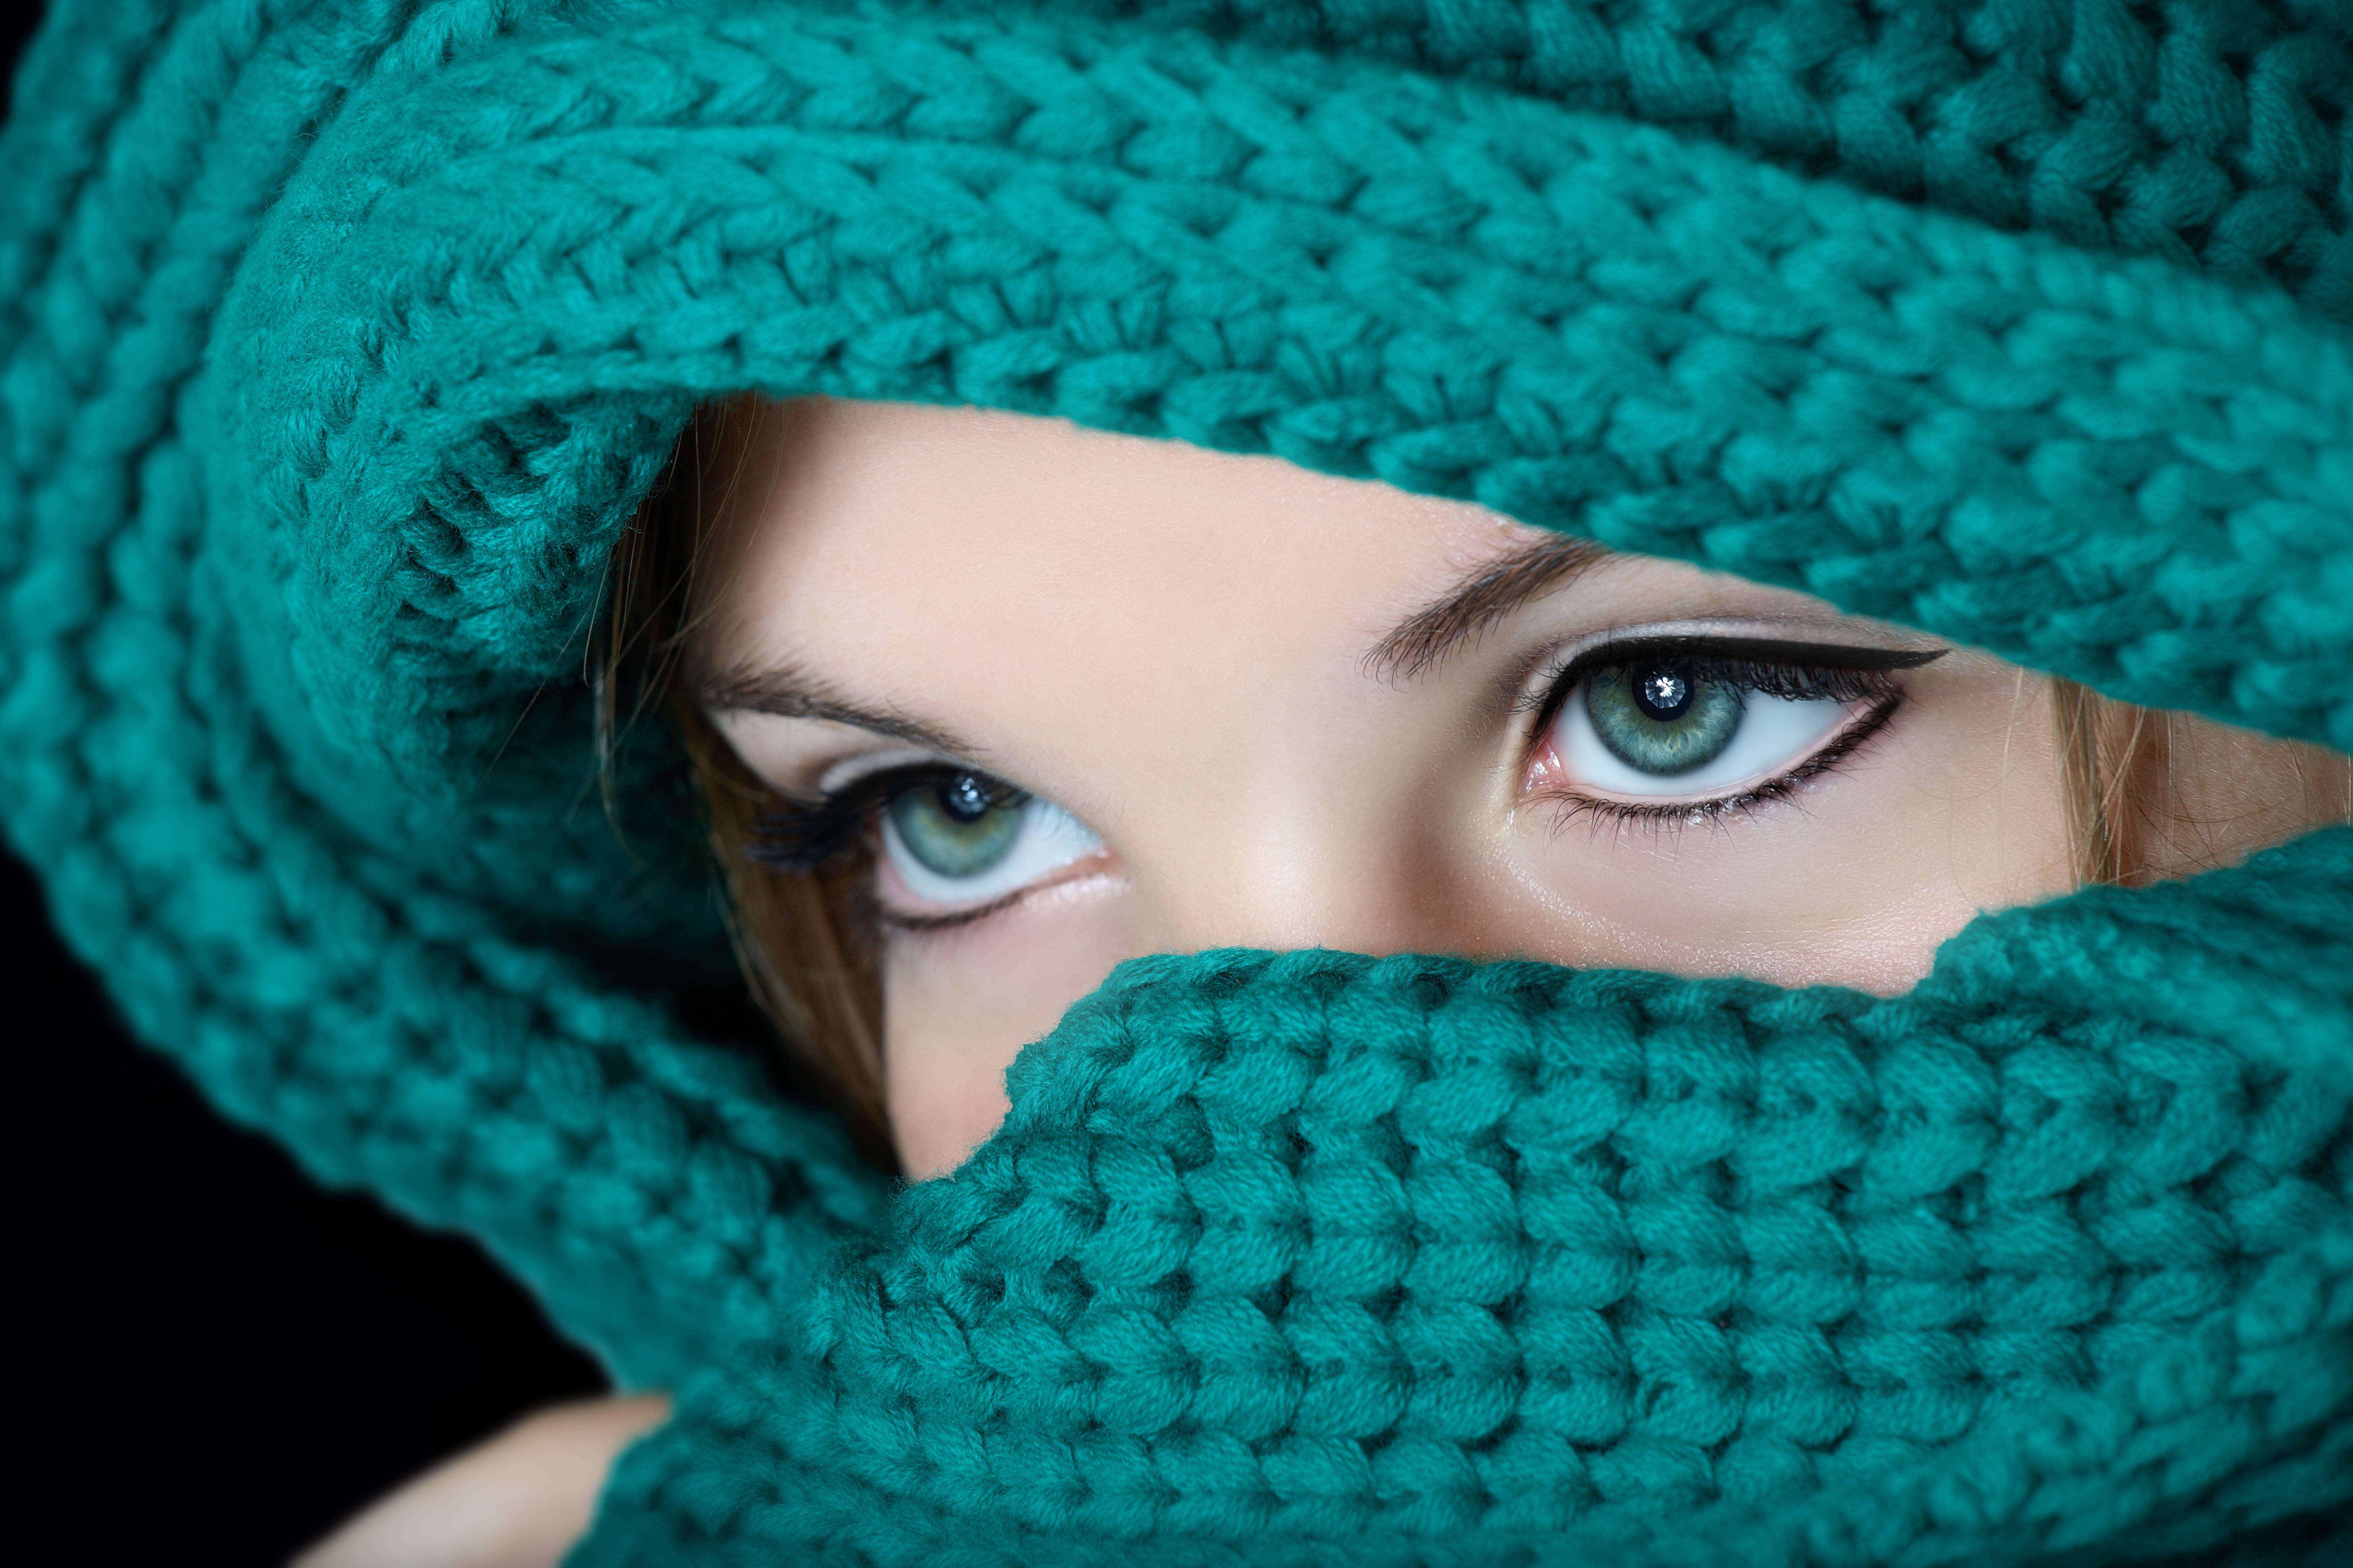 women, model, face, blue eyes, scarf, green eyes, young adult